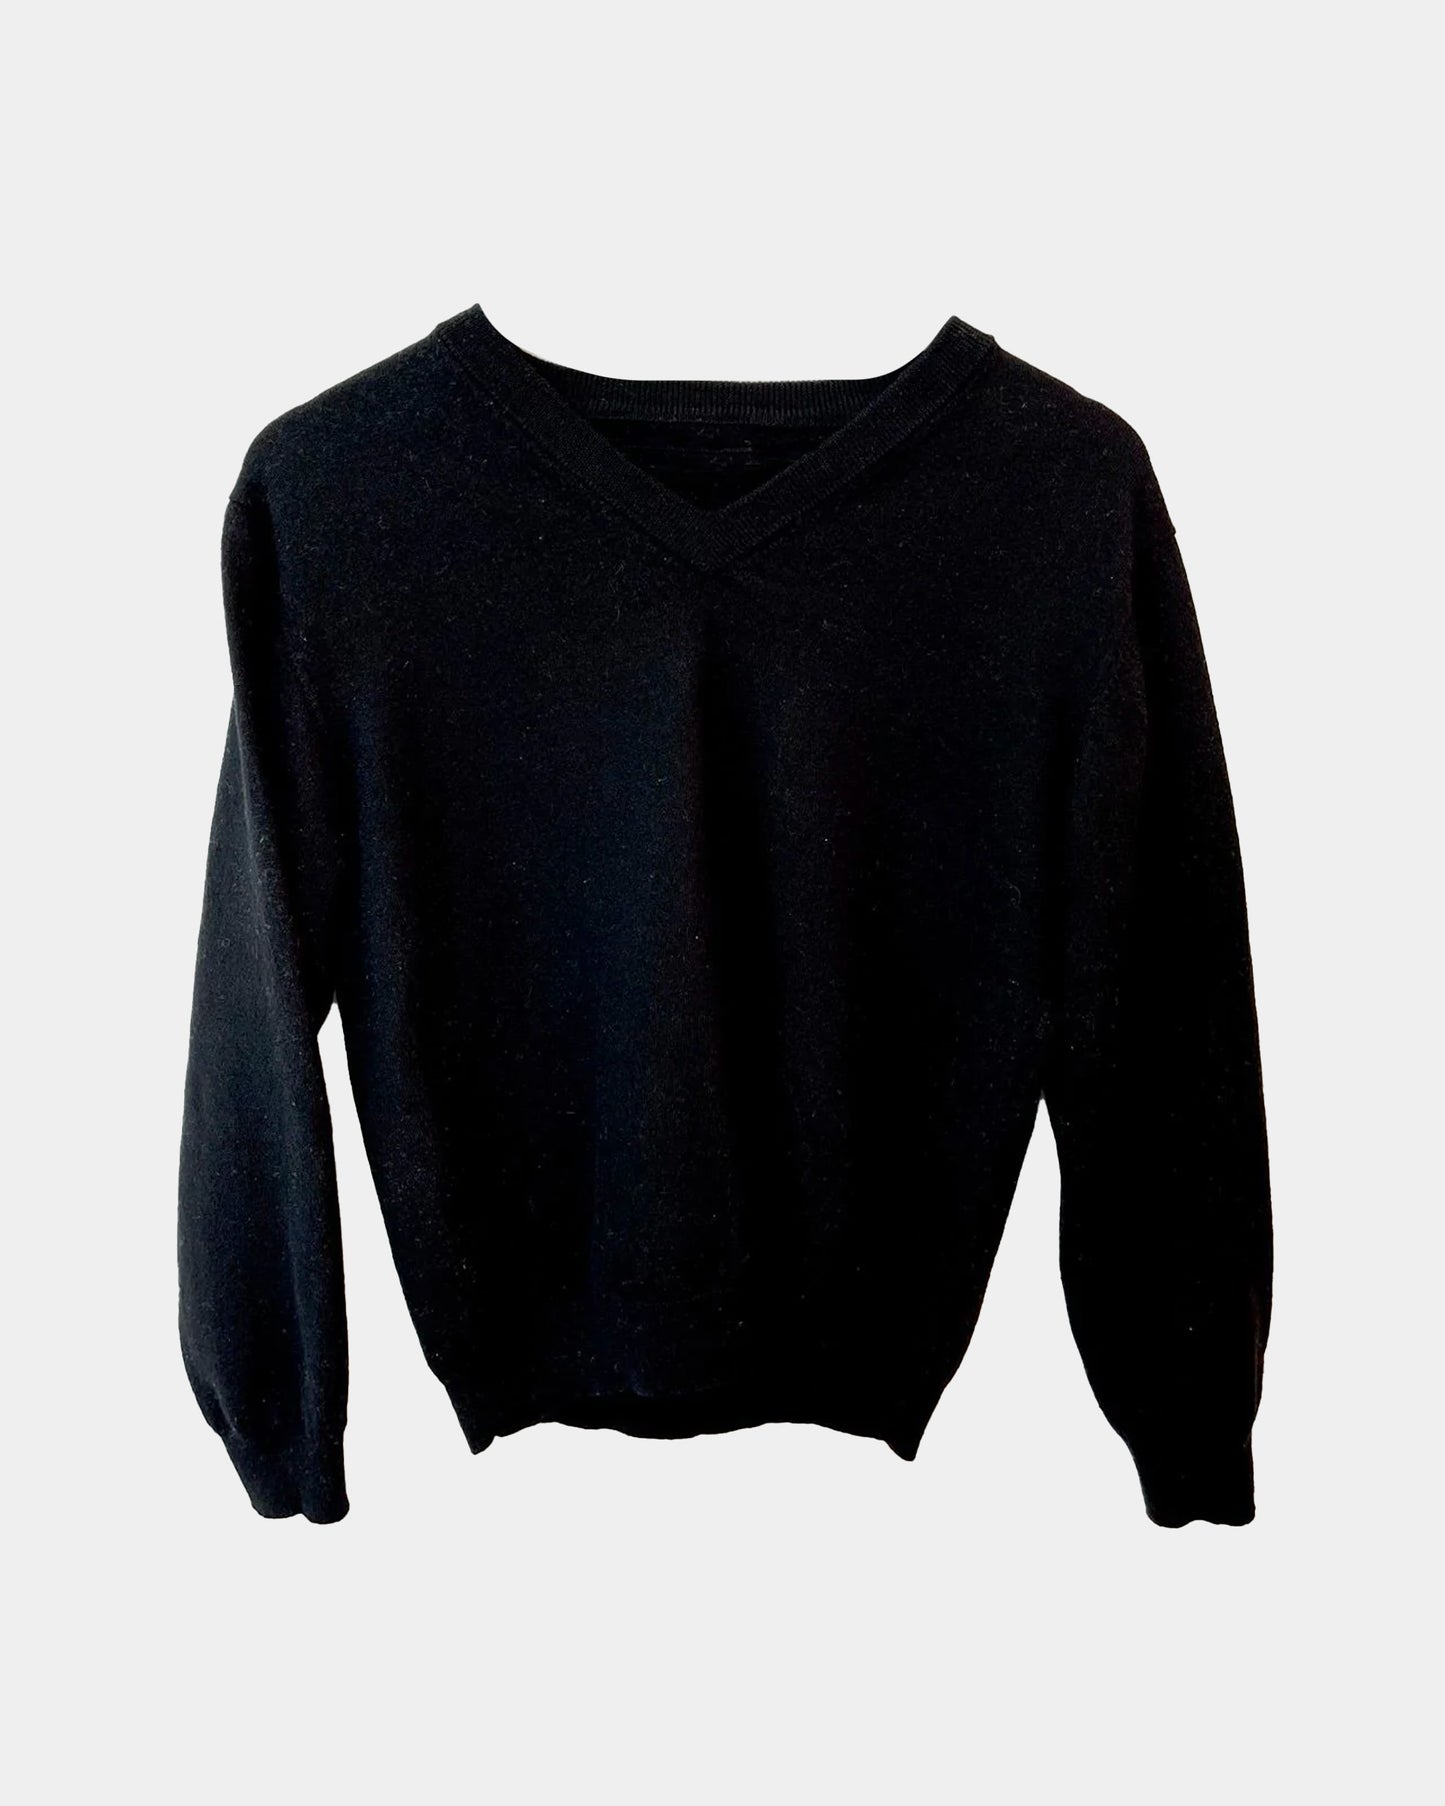 Vintage Classic Black Wool Sweater Small